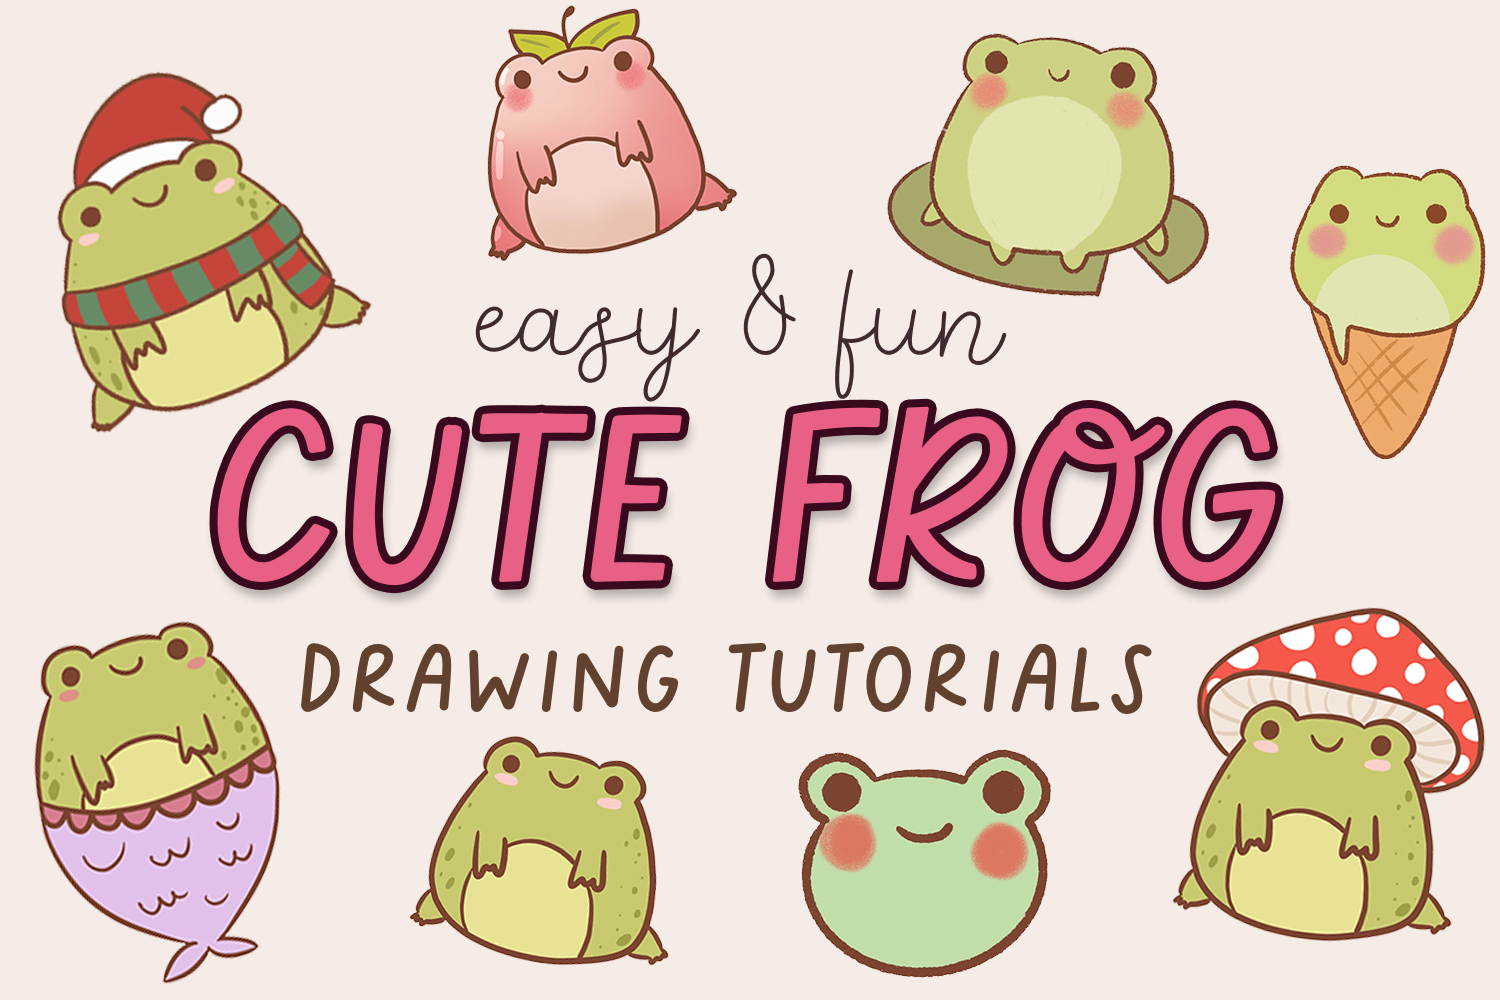 easy frog drawing ideas, easy frog drawings, how to draw a cute kawaii frog, free frog drawing tutorials for kids and beginners